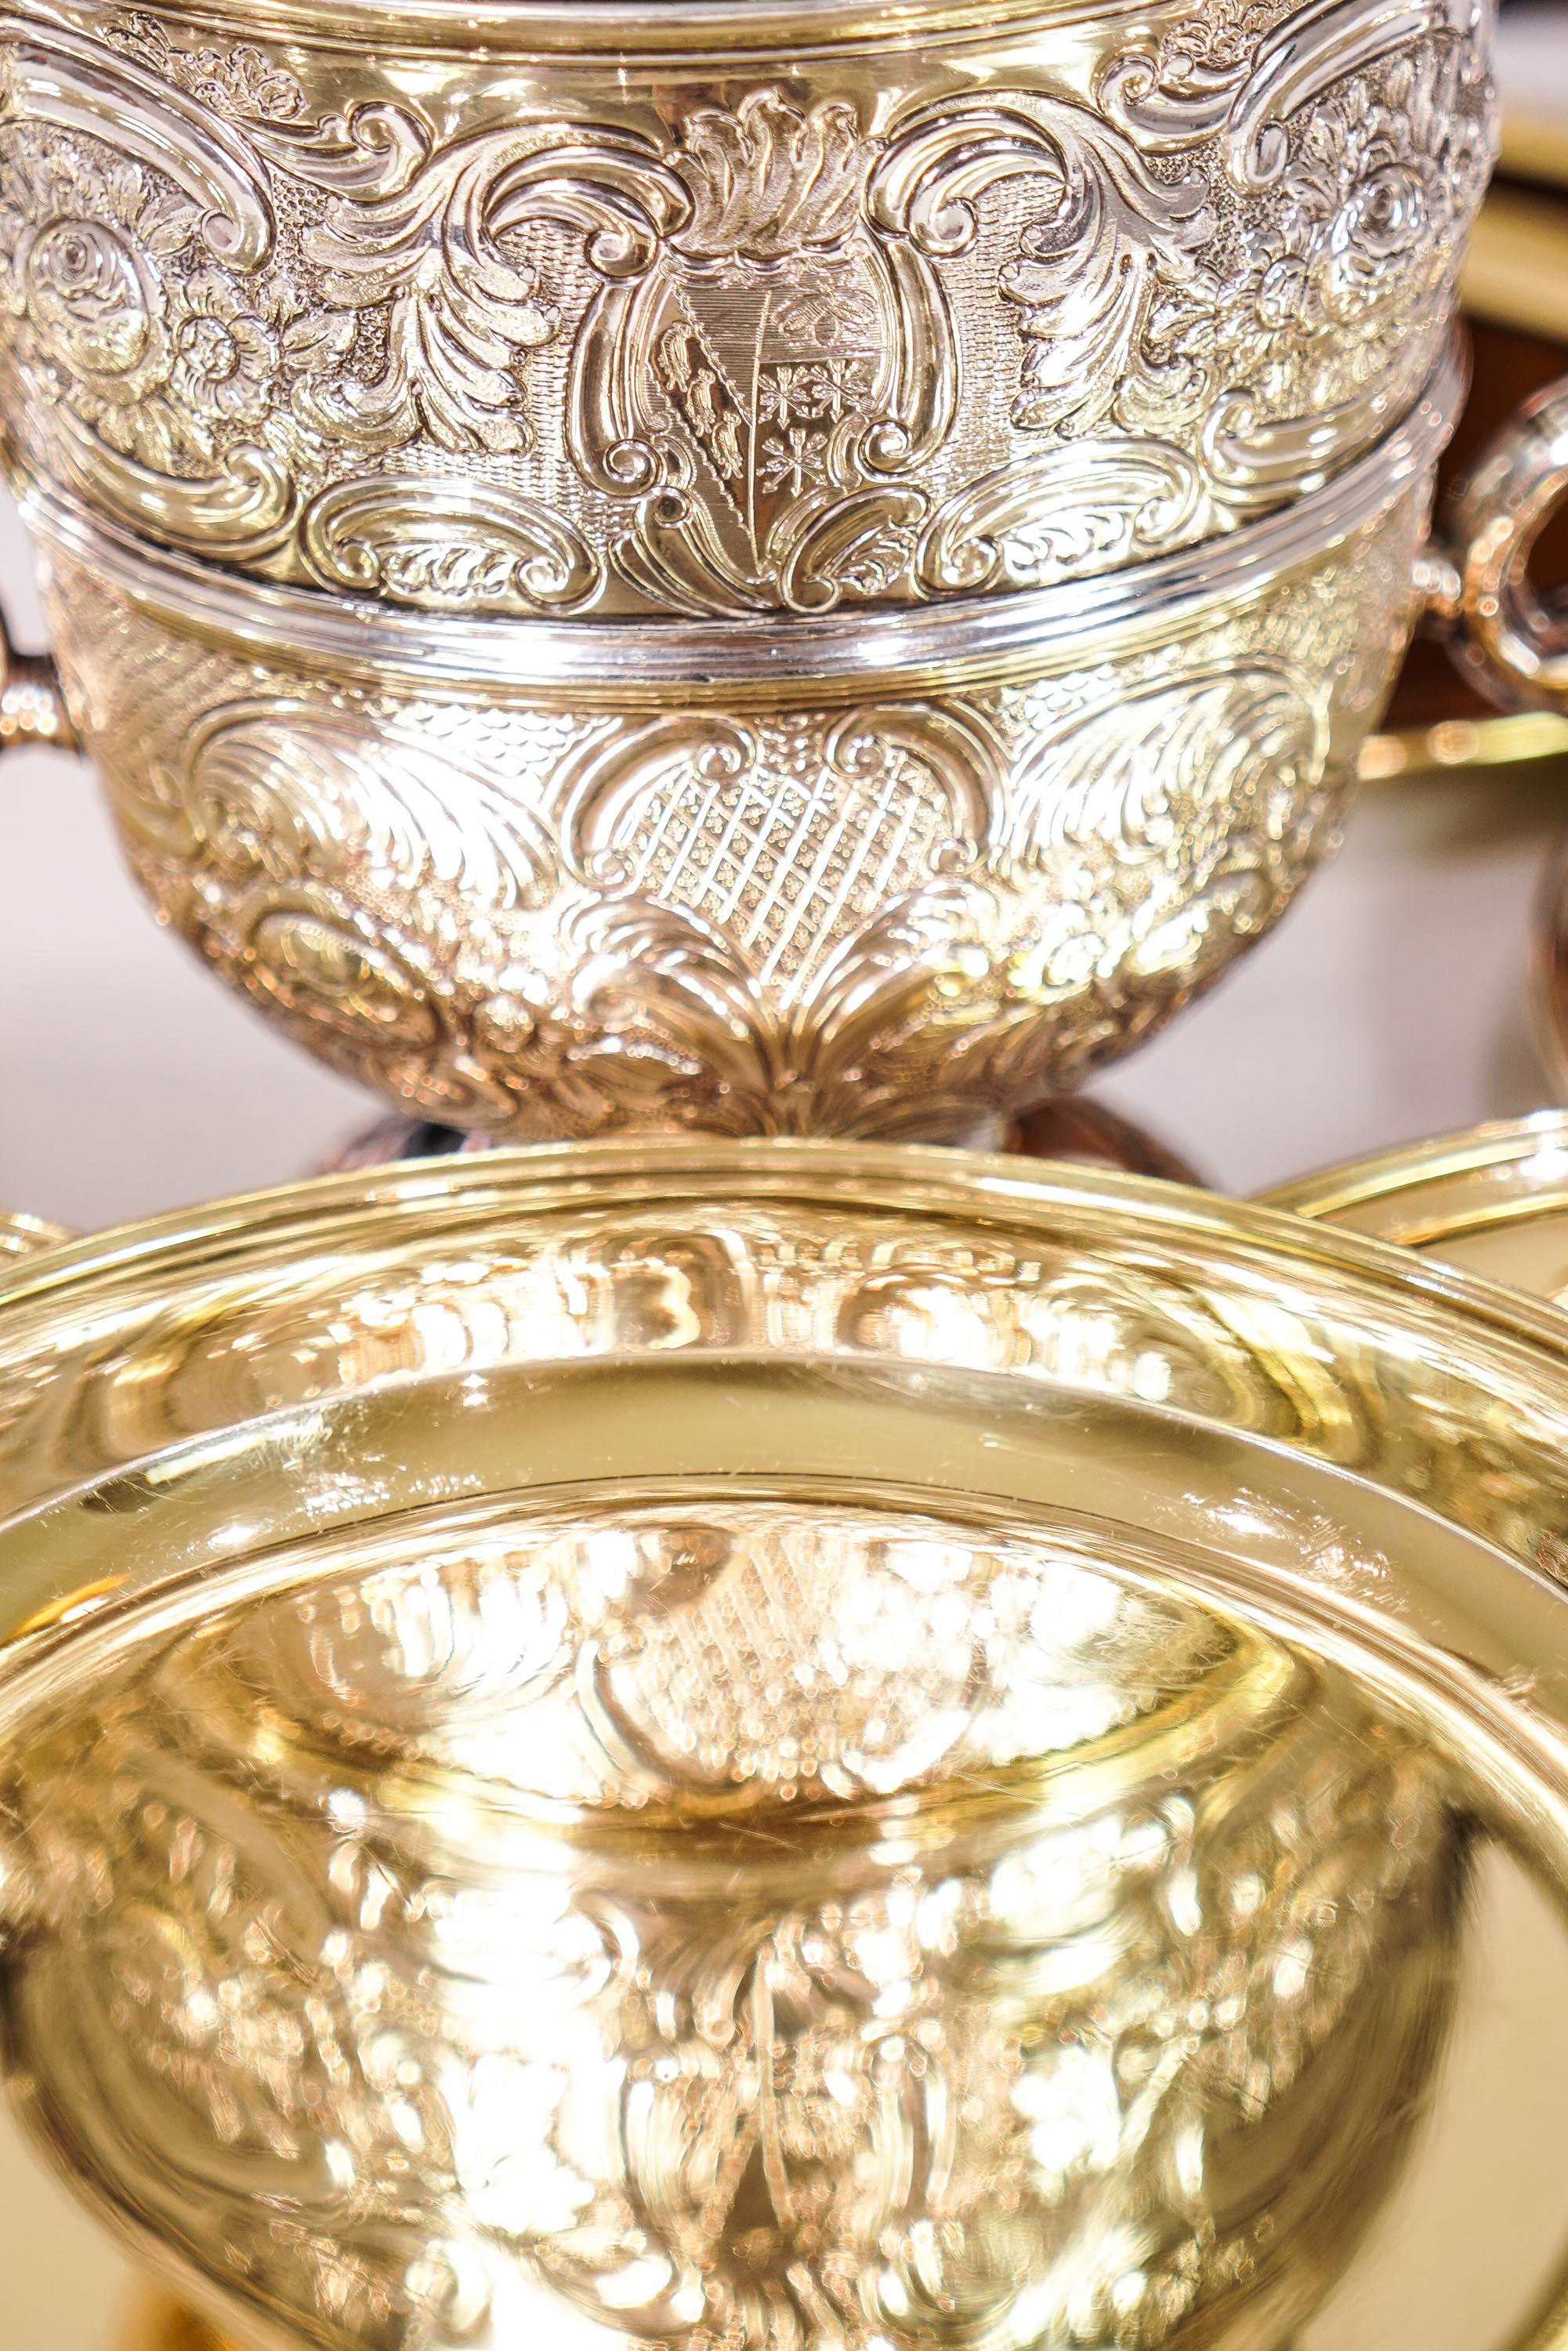 Magnificent Set of 12 Georgian Solid Silver Gilt Dishes - 1780-1811 For Sale 4